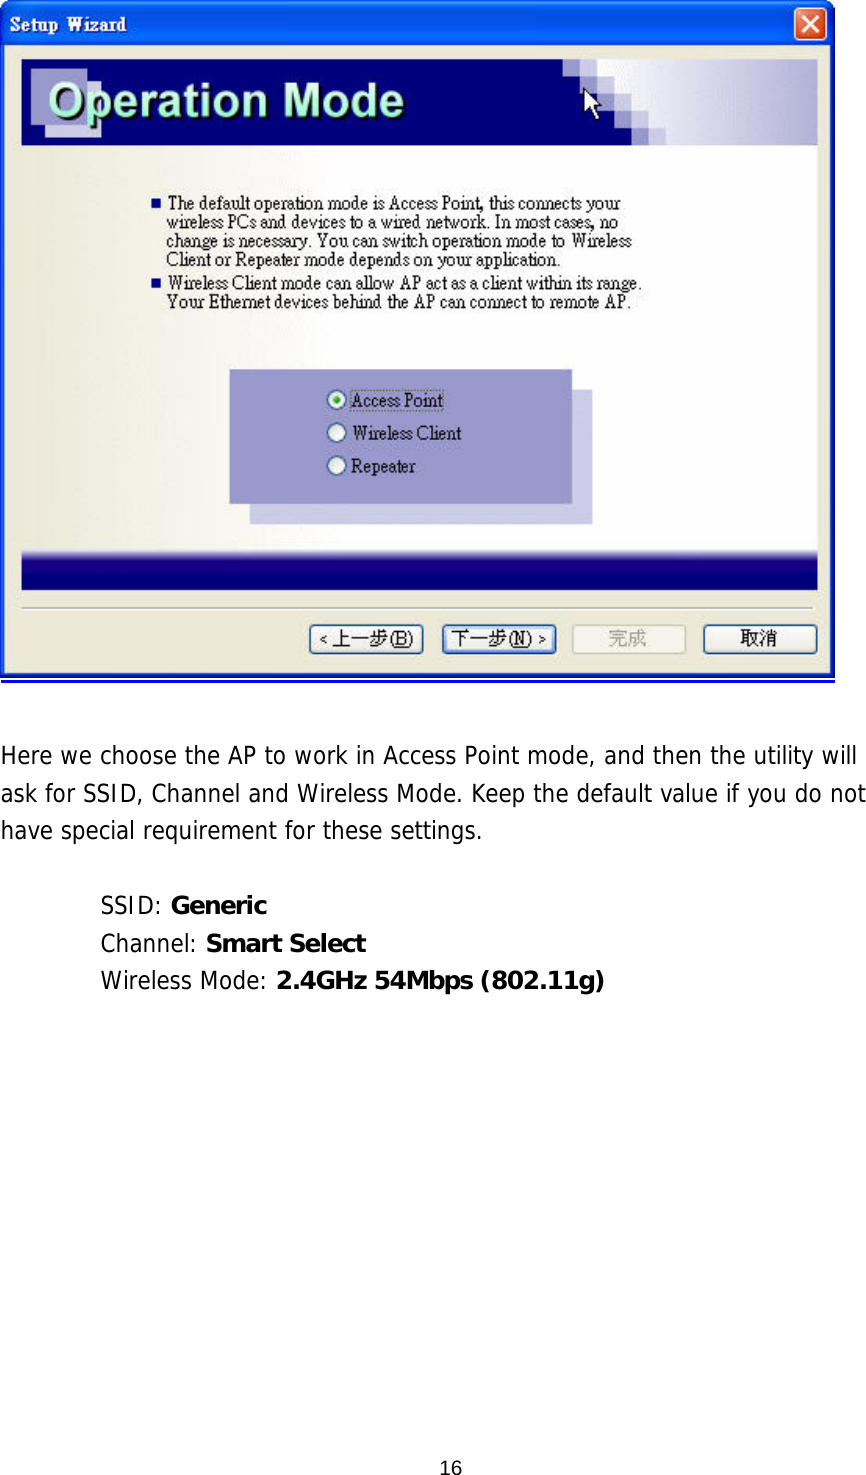   Here we choose the AP to work in Access Point mode, and then the utility will ask for SSID, Channel and Wireless Mode. Keep the default value if you do not have special requirement for these settings.   SSID: Generic Channel: Smart Select Wireless Mode: 2.4GHz 54Mbps (802.11g)       16